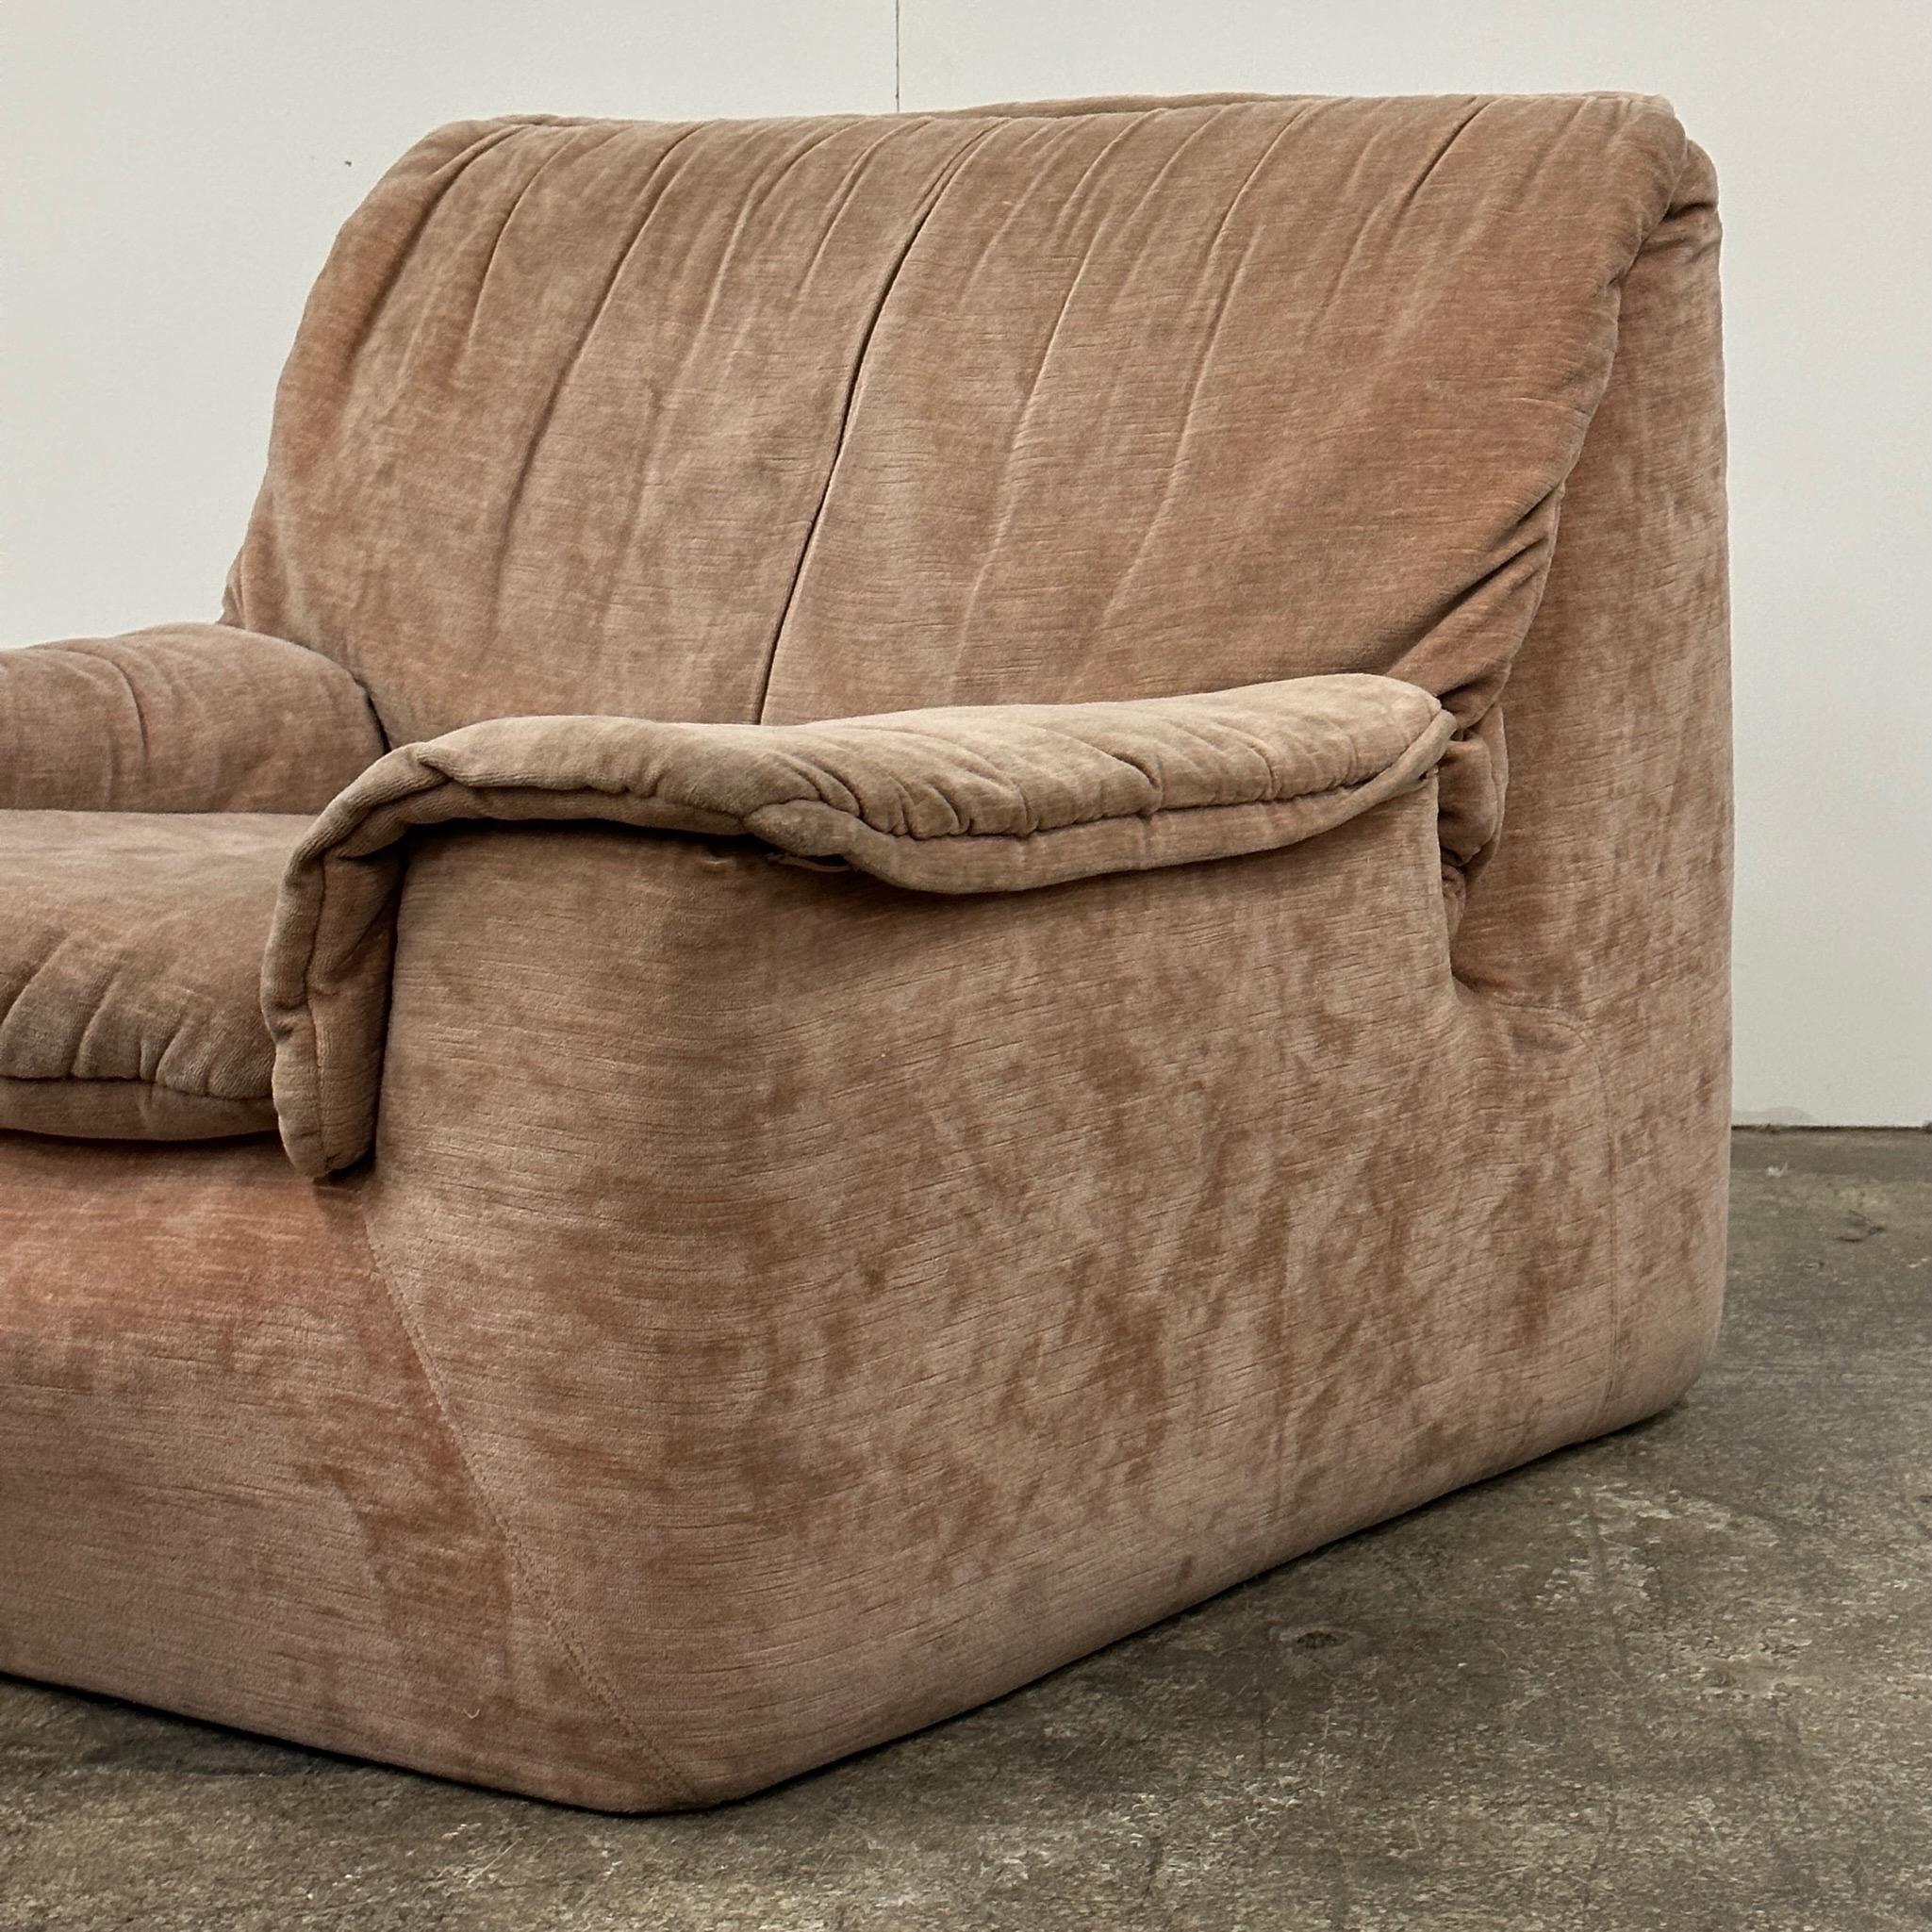 c. 1970s. Upholstered in pale pink velvet. Sculpted foam cushions. Tagged. Made by Cinna (Ligne Roset). 